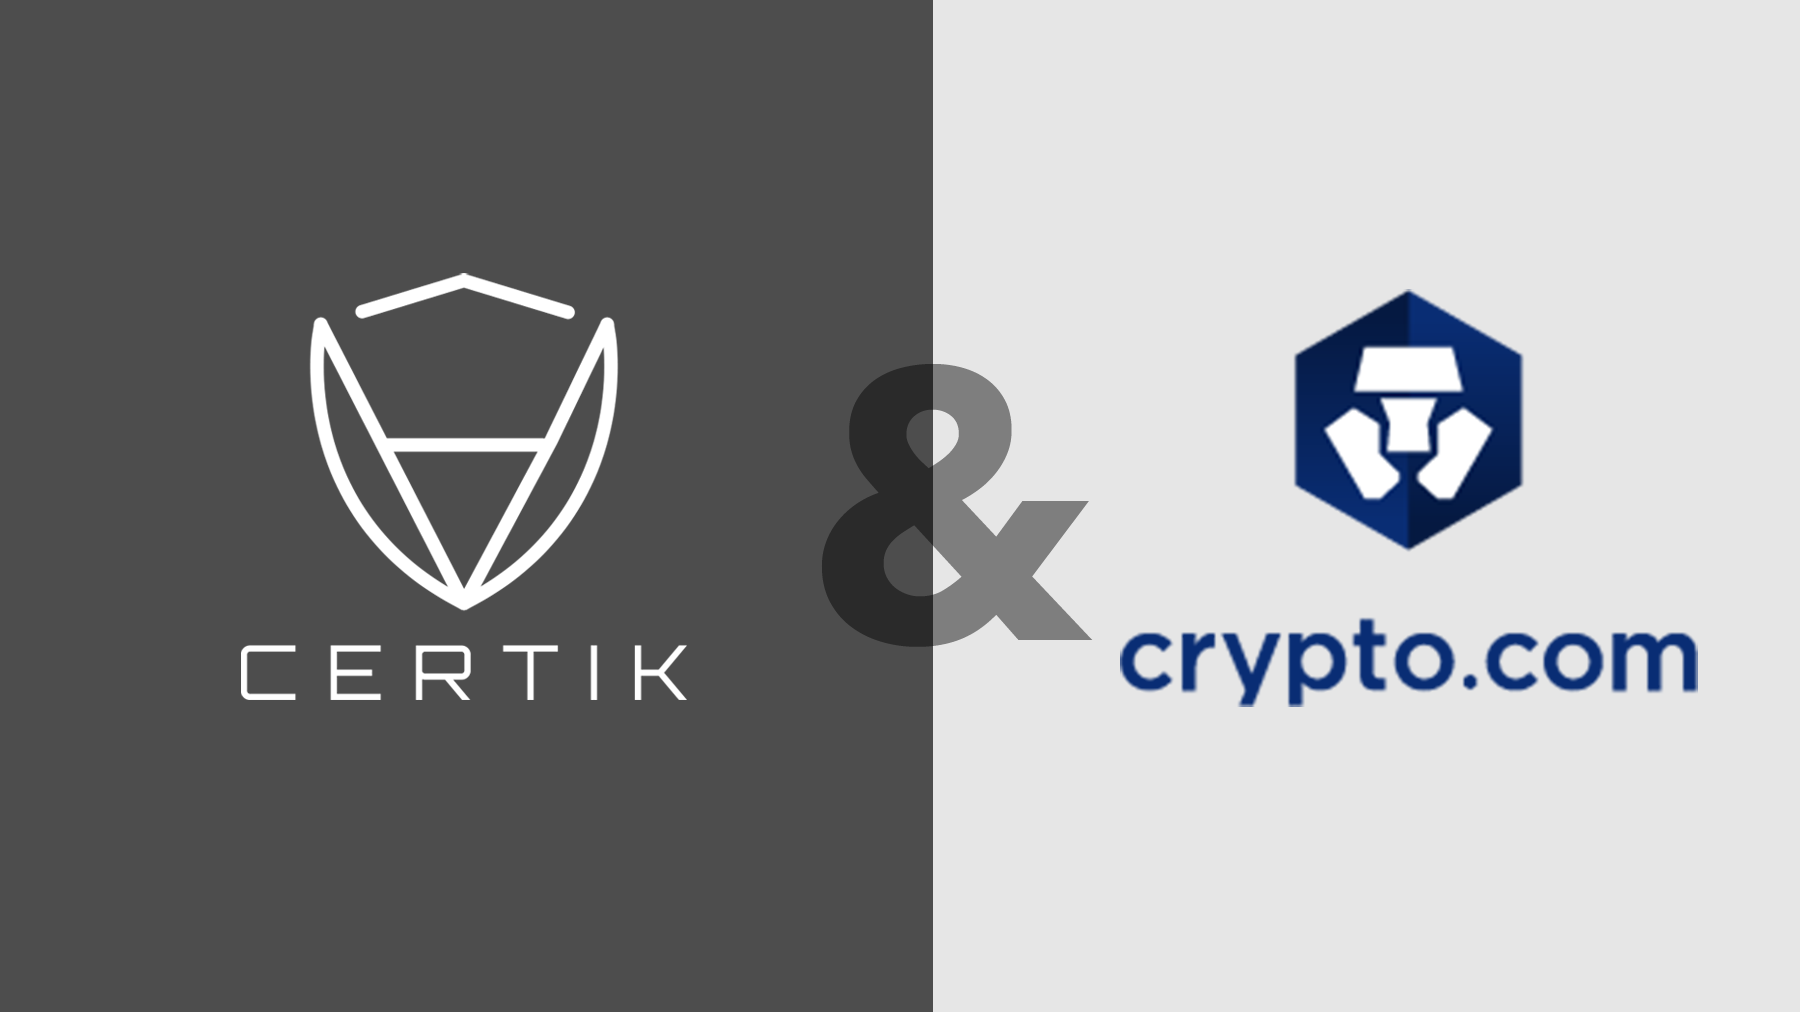 CertiK Has Conducted Successful Audit of Crypto.com Smart Contract